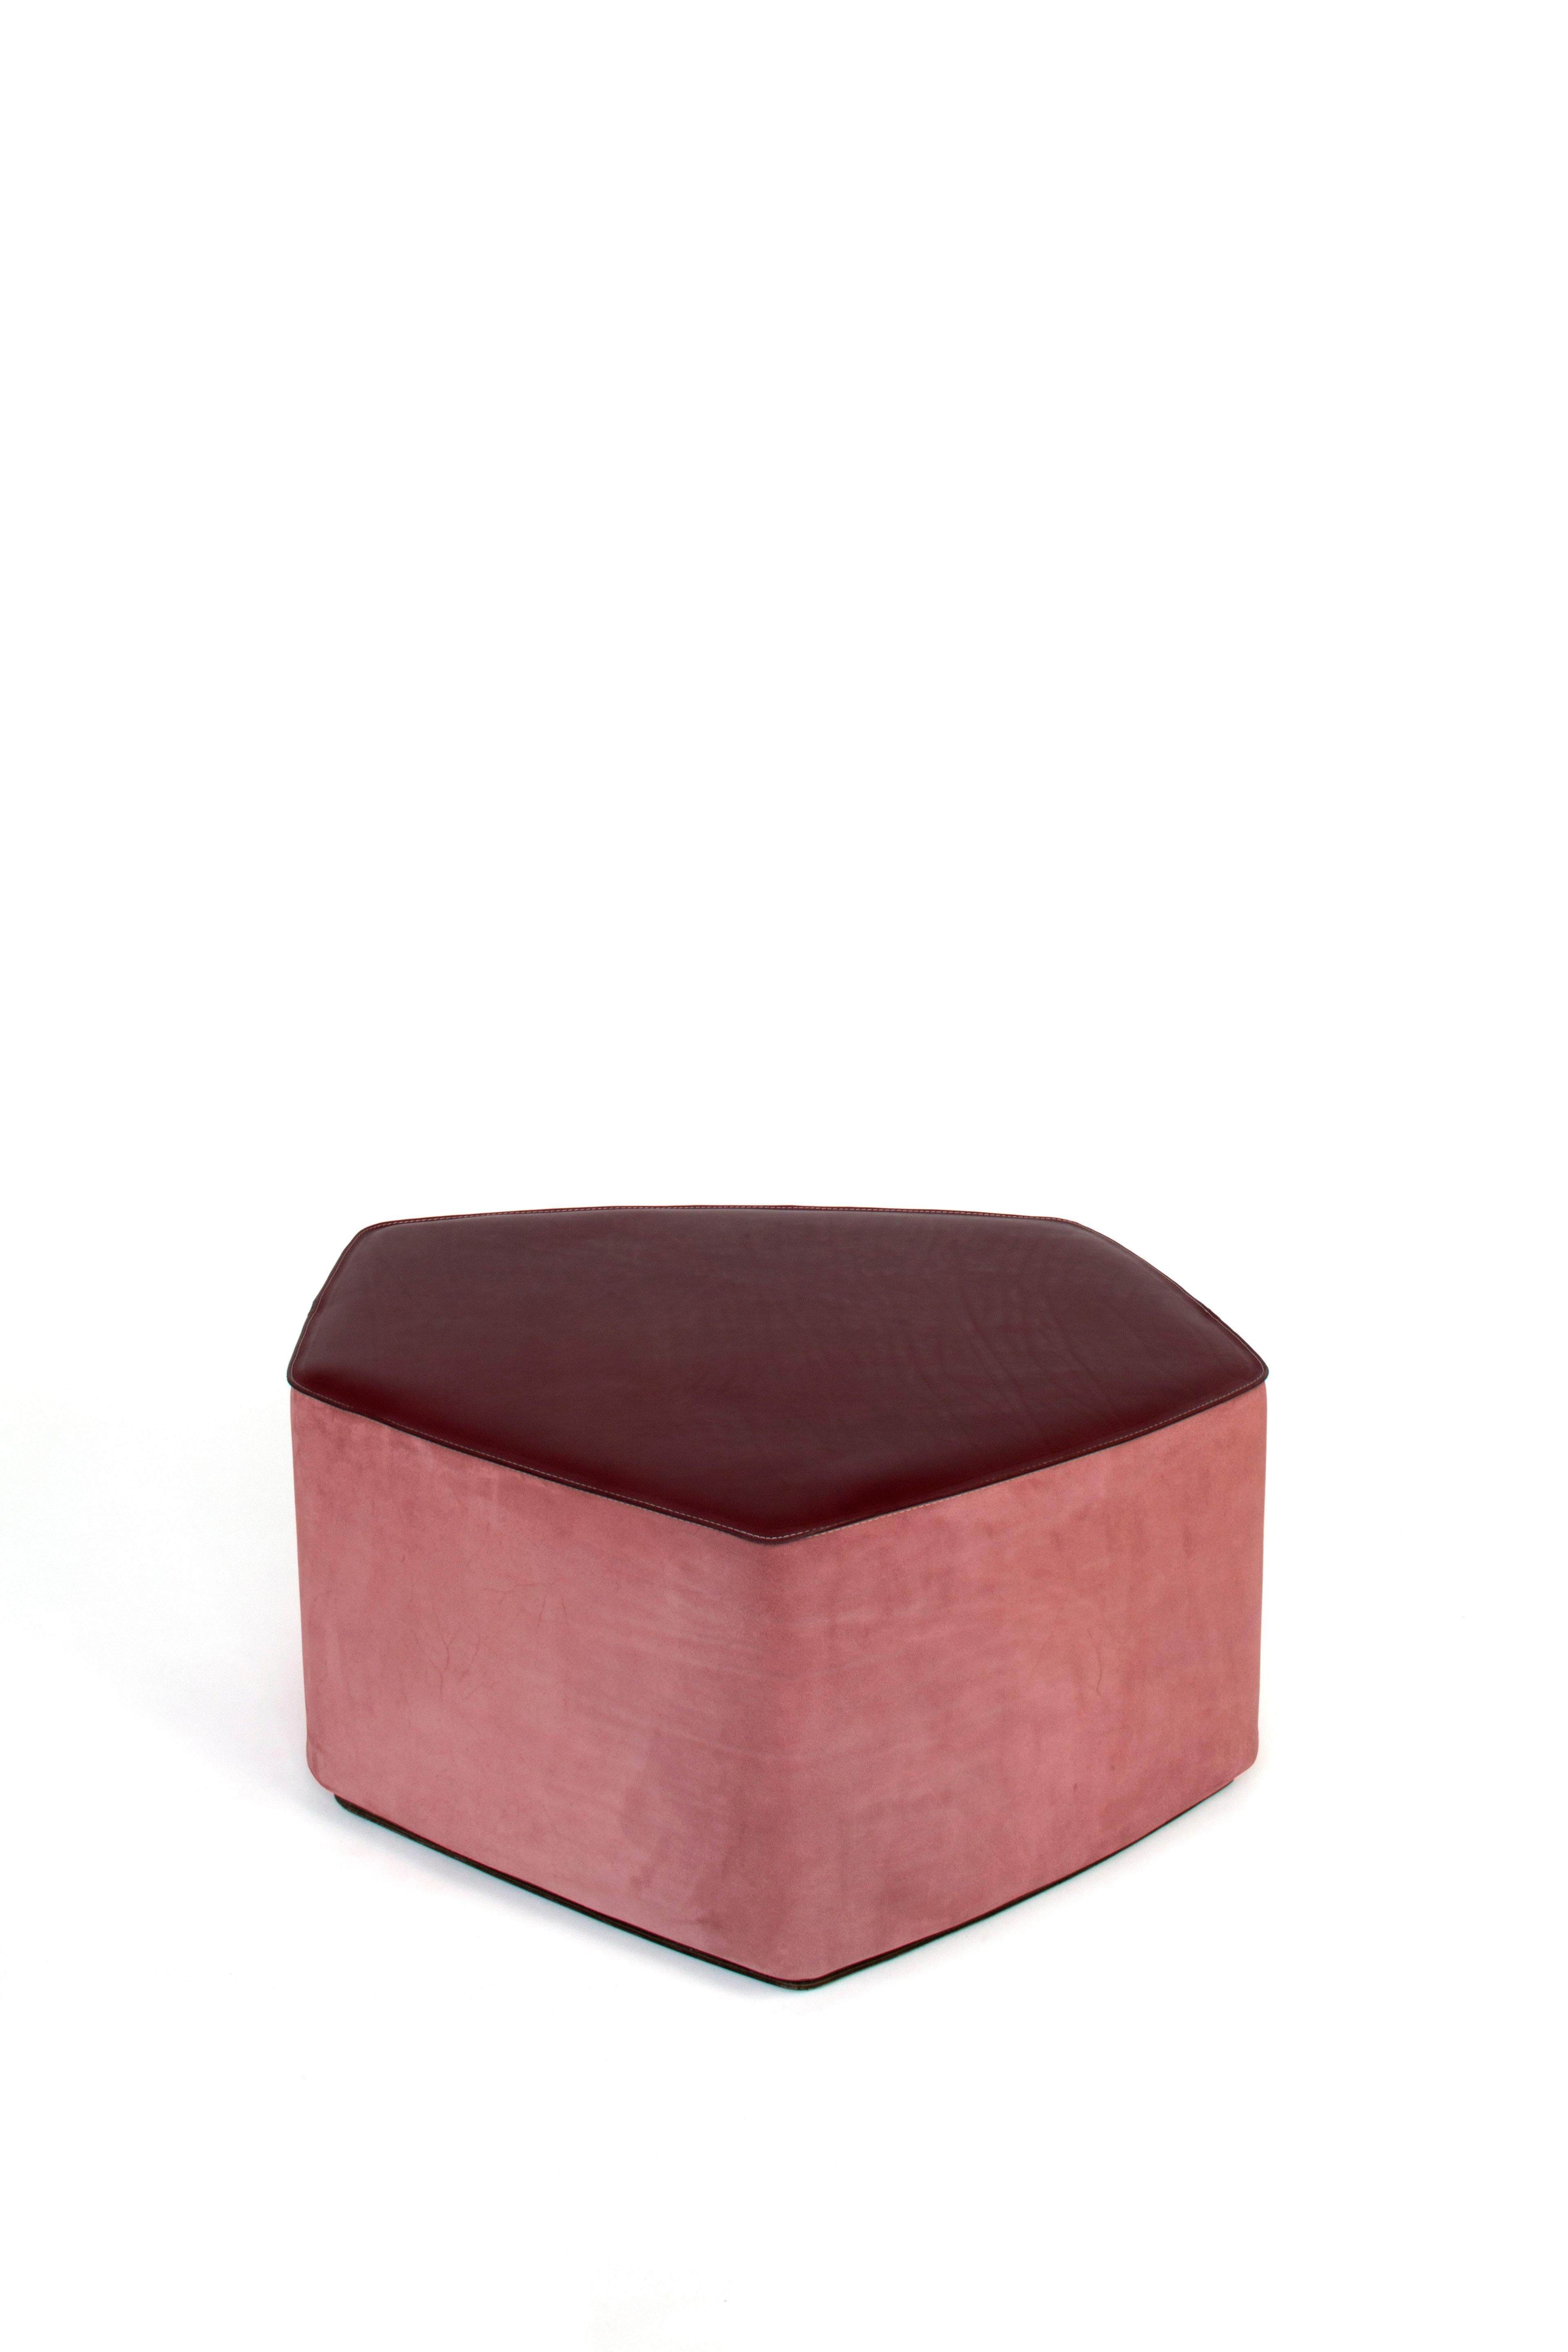 Set of 3 Pouf! Leather Stools by Nestor Perkal 2